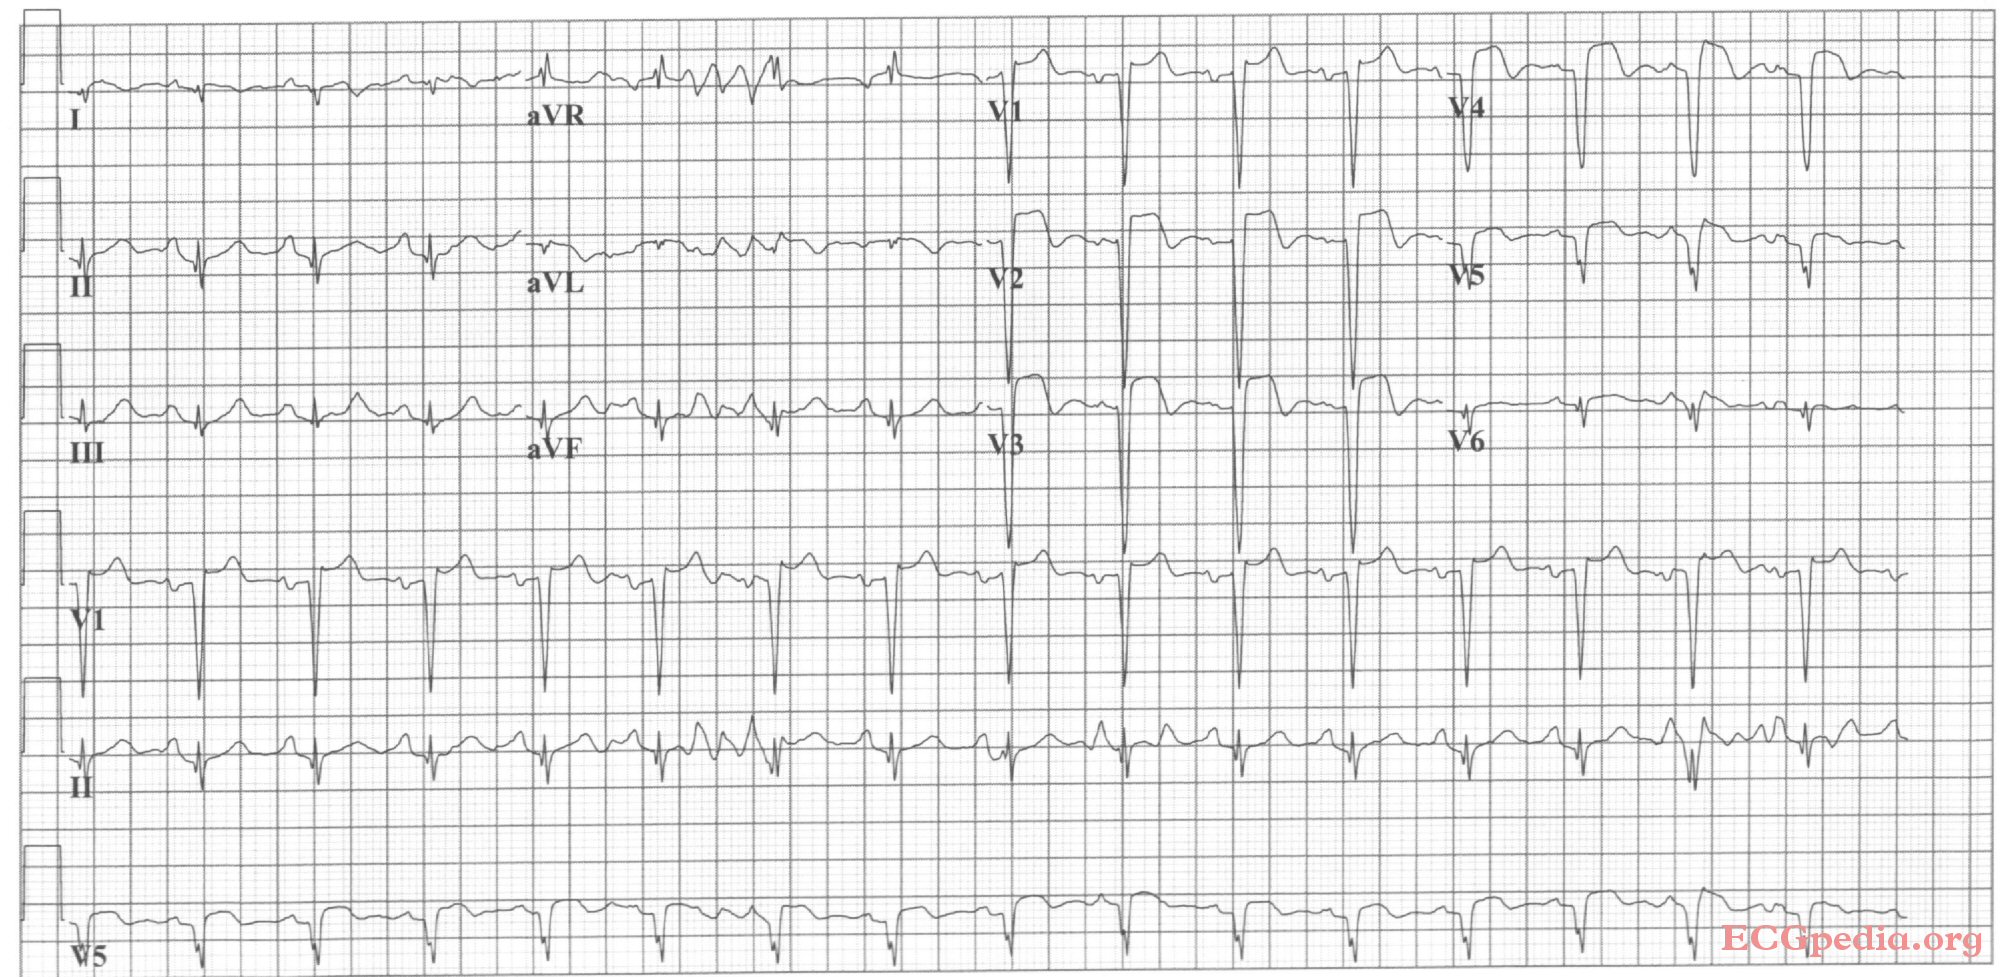 Acute anterior MI. Loss of R waves throughout the anterior wall (V1-V6). QS complexes in V3-V5. ST elevation in V1-V5 with terminal negative T waves.